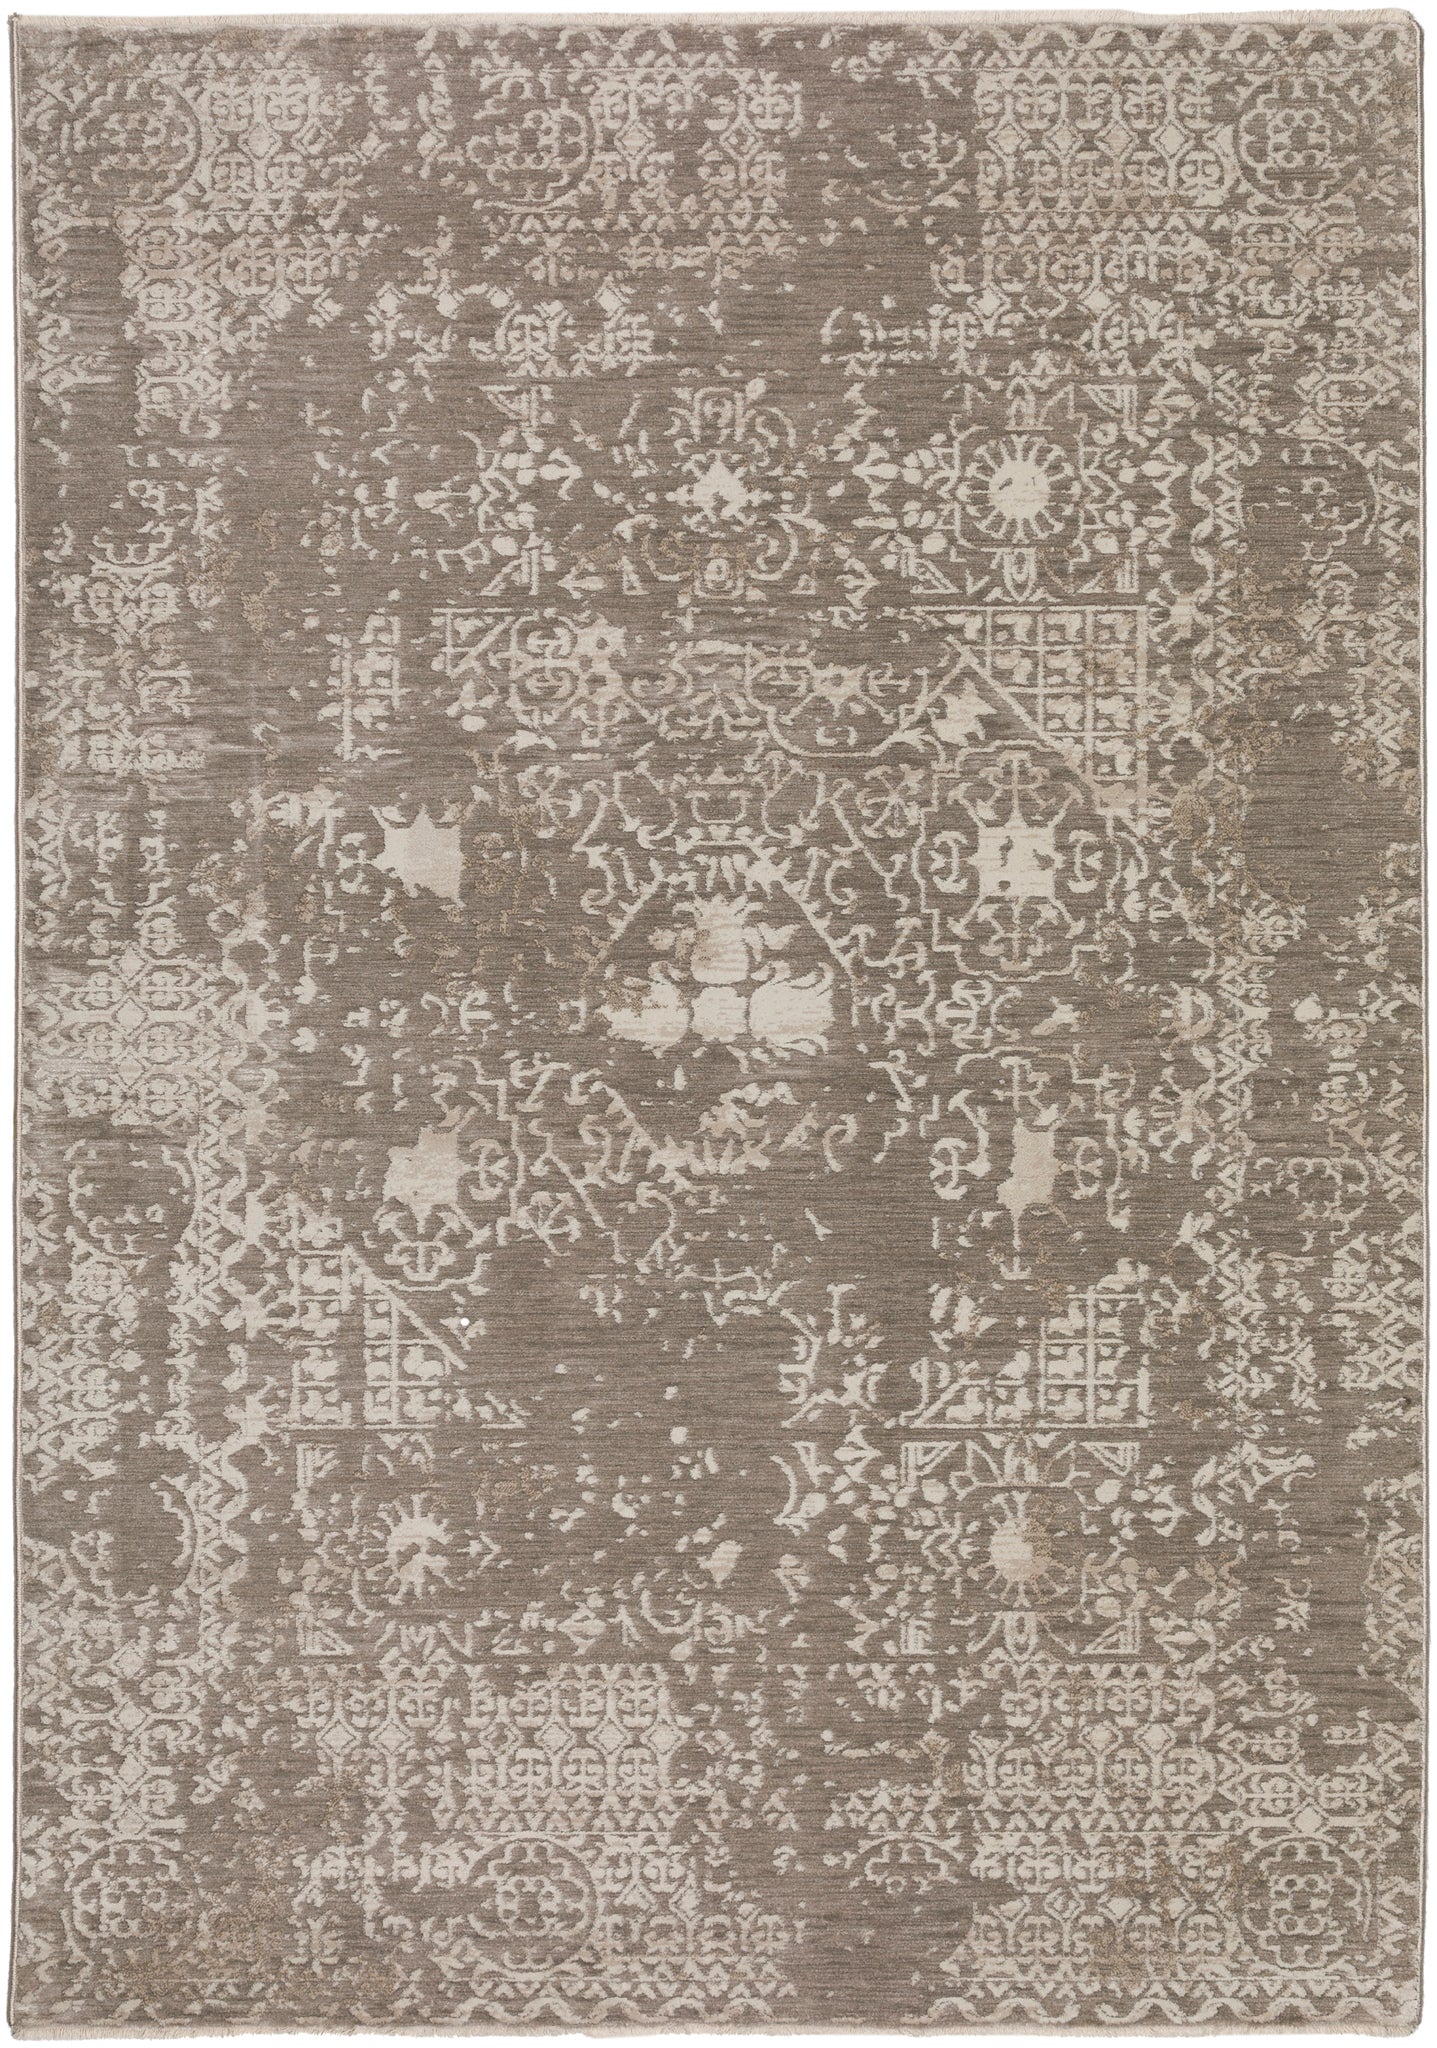 modern reproduction of a grey and silver toned wool rug 